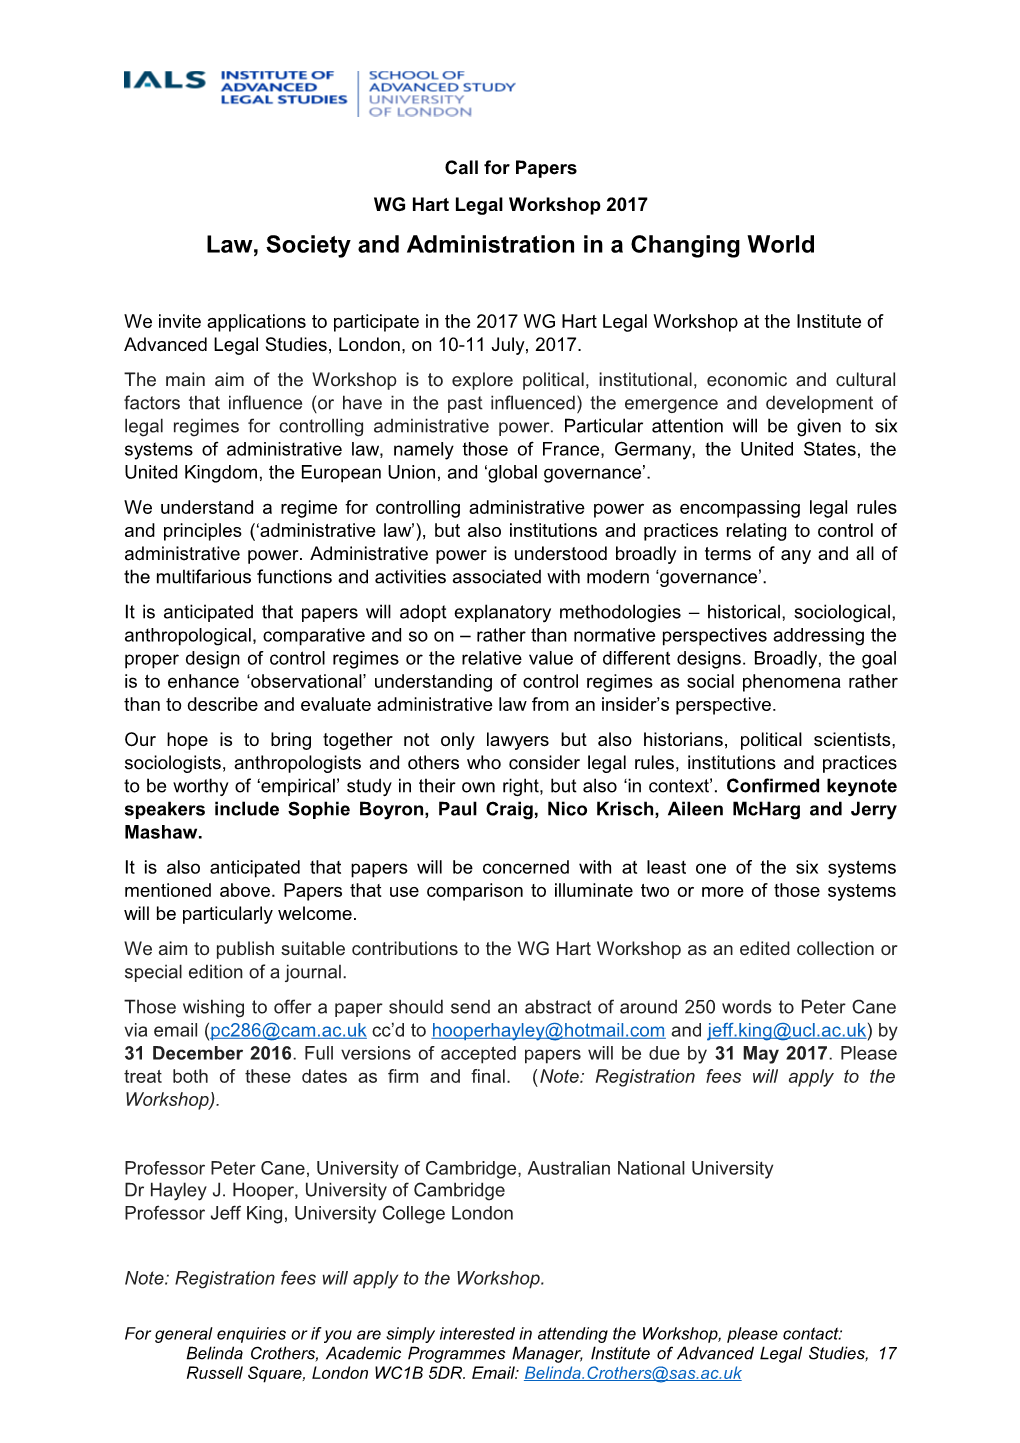 Law, Society and Administration in a Changing World